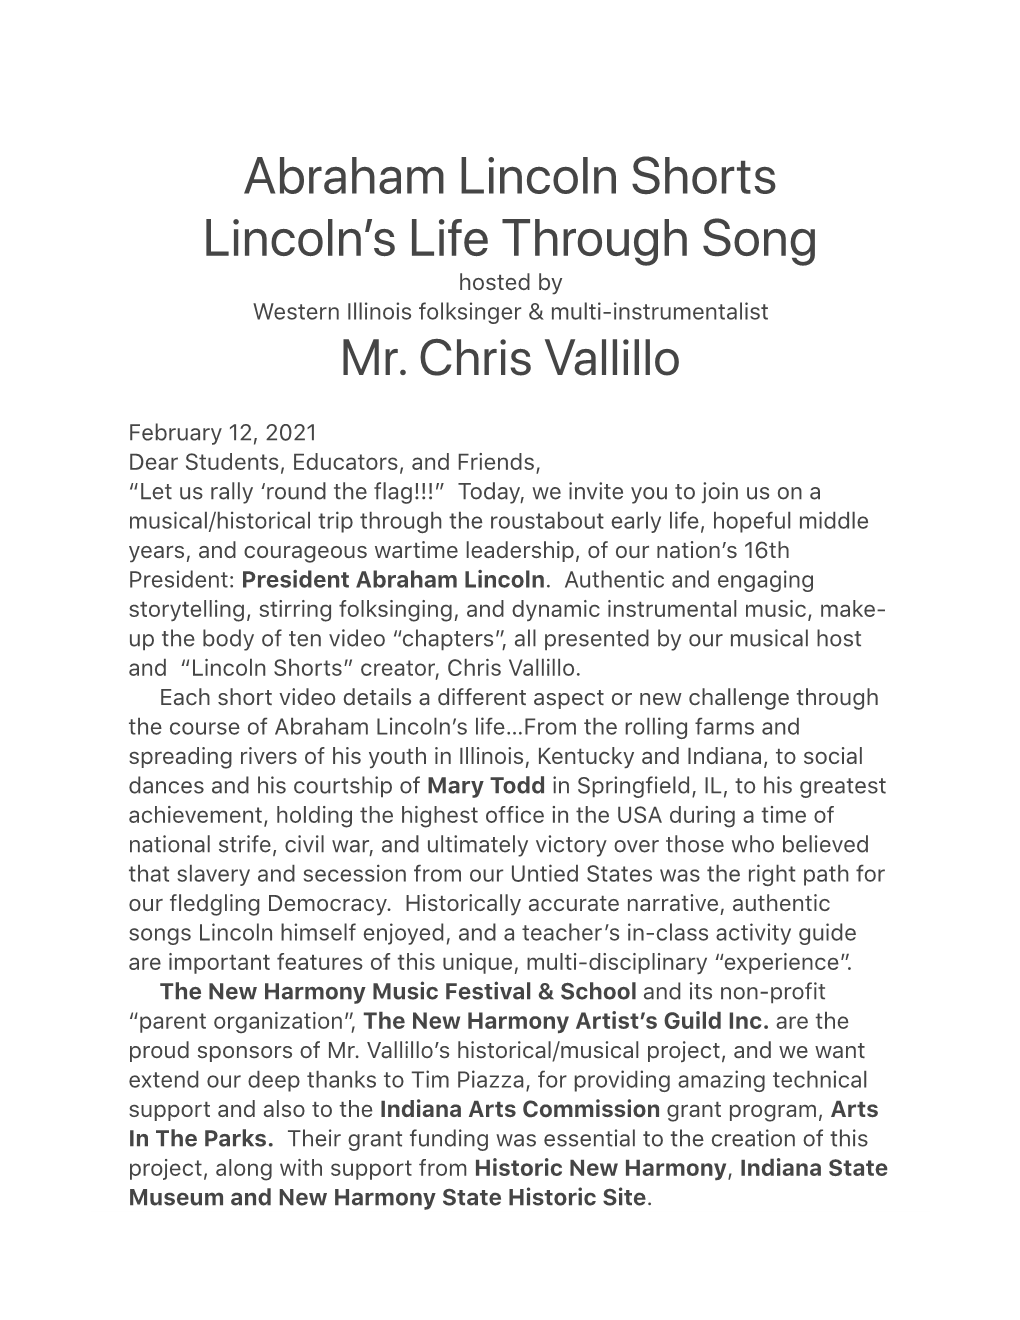 Abraham Lincoln Shorts Lincoln’S Life Through Song Hosted by Western Illinois Folksinger & Multi-Instrumentalist Mr